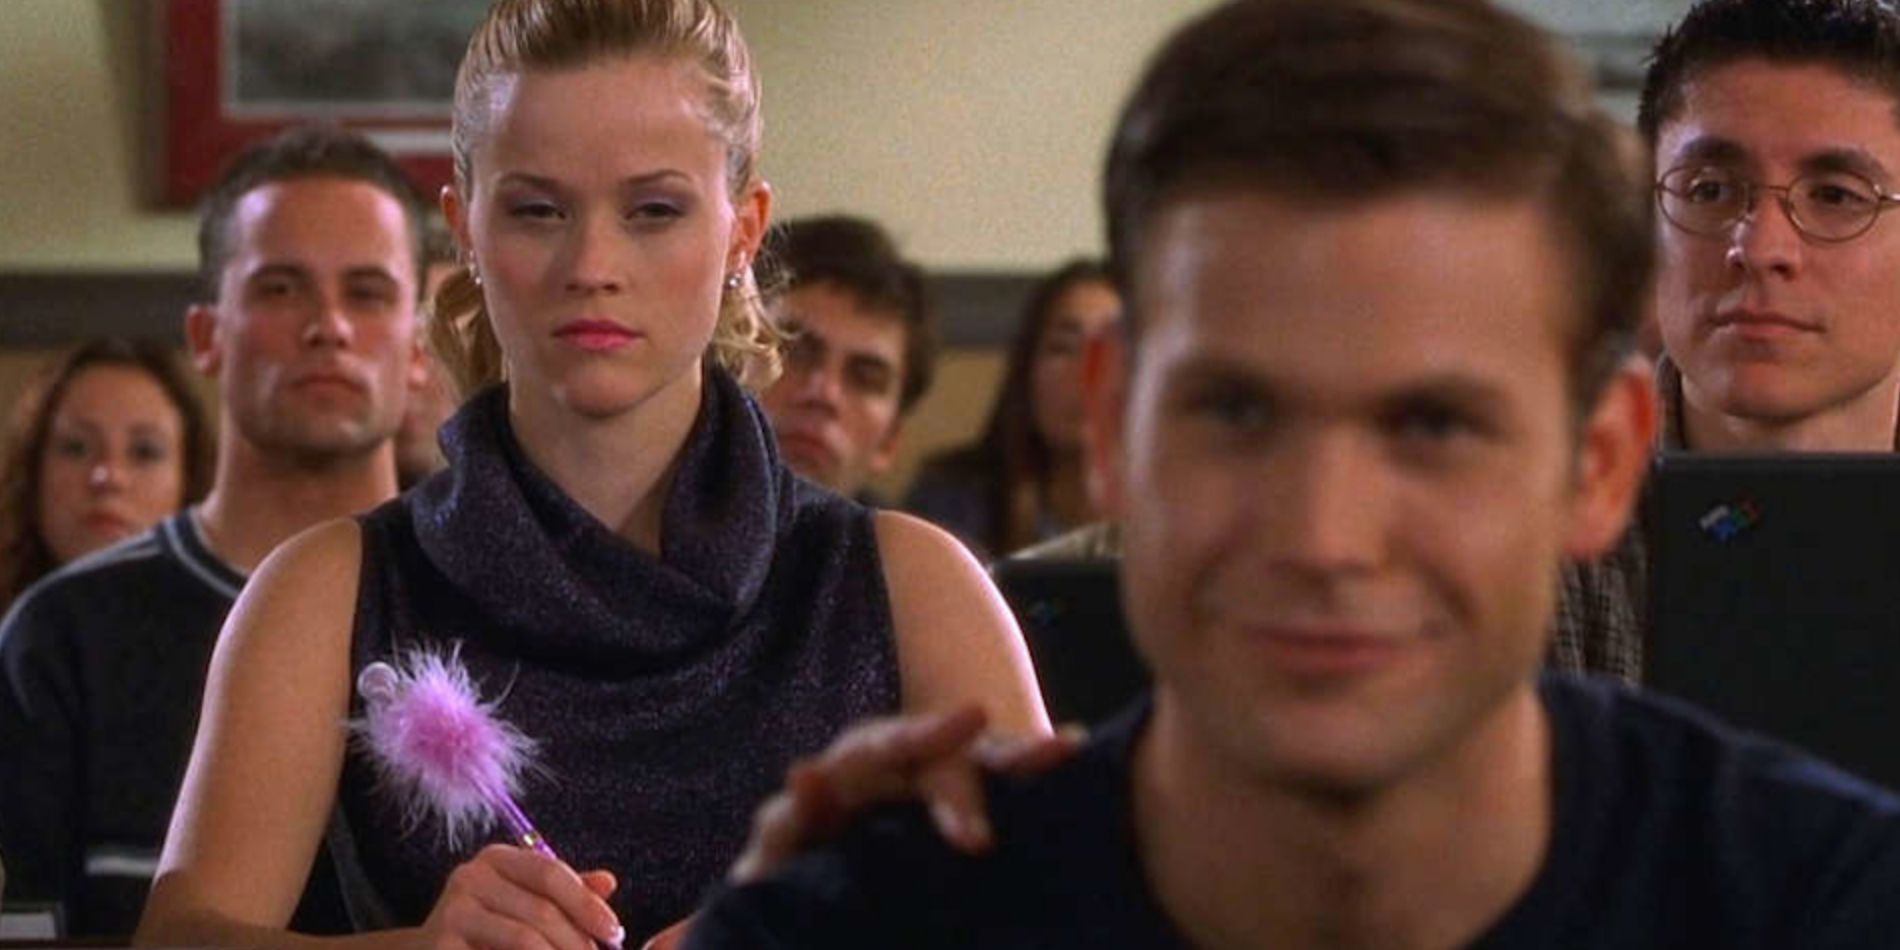 Elle Woods glares at Warner in class in Legally Blonde